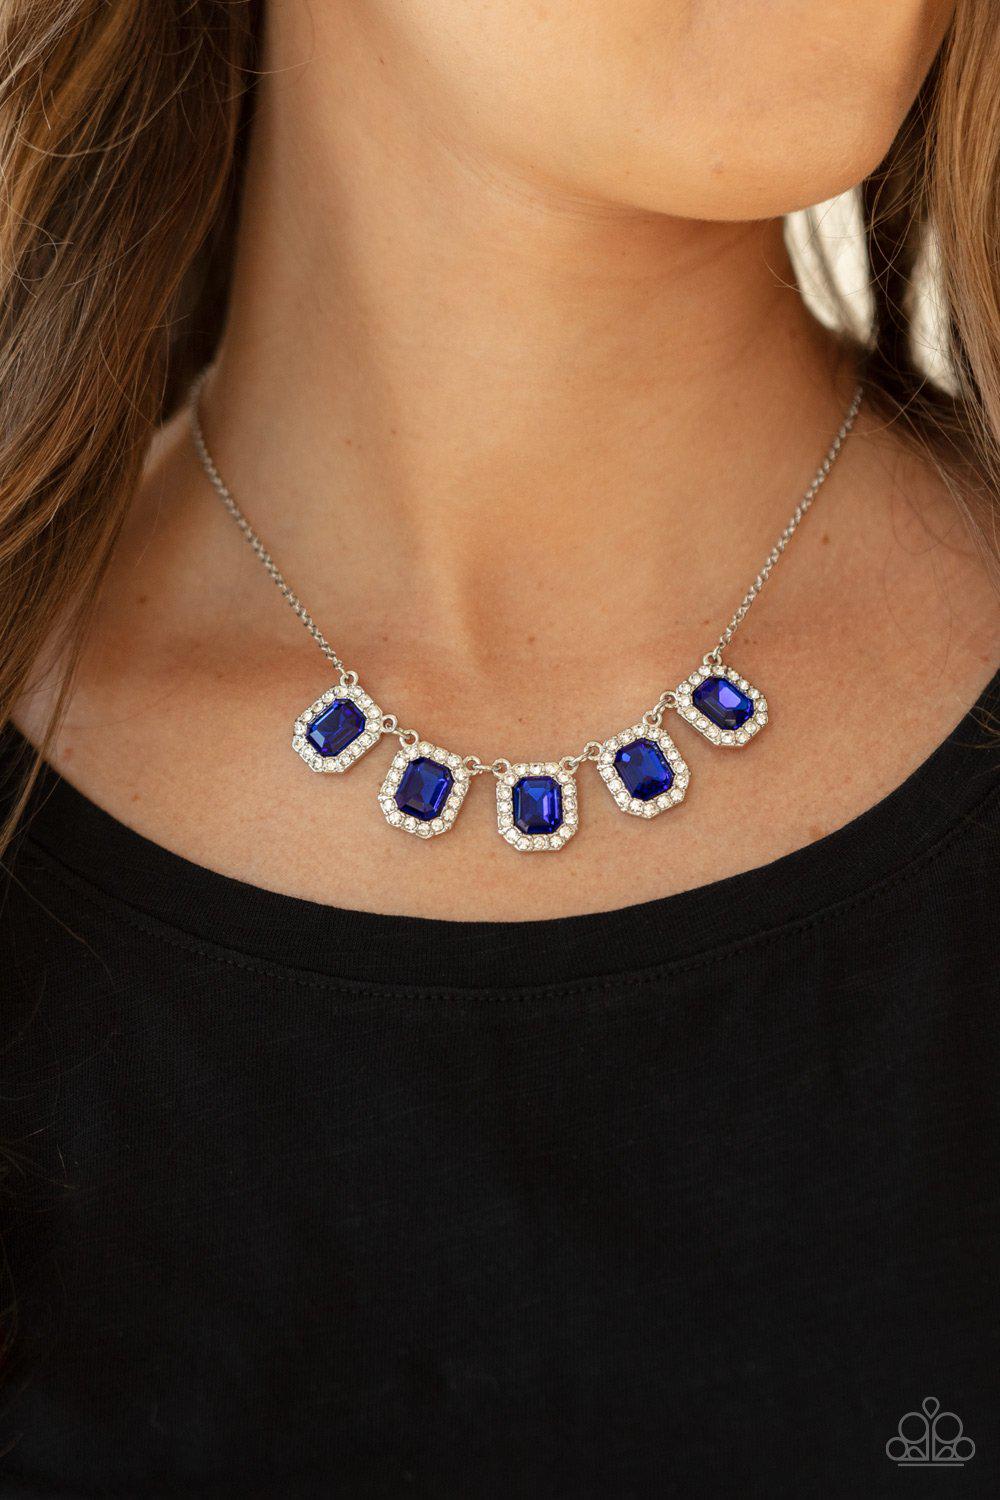 Mariell Bridals Rhinestone Necklace Set with Royal Blue Caged Pear 4140S-RY